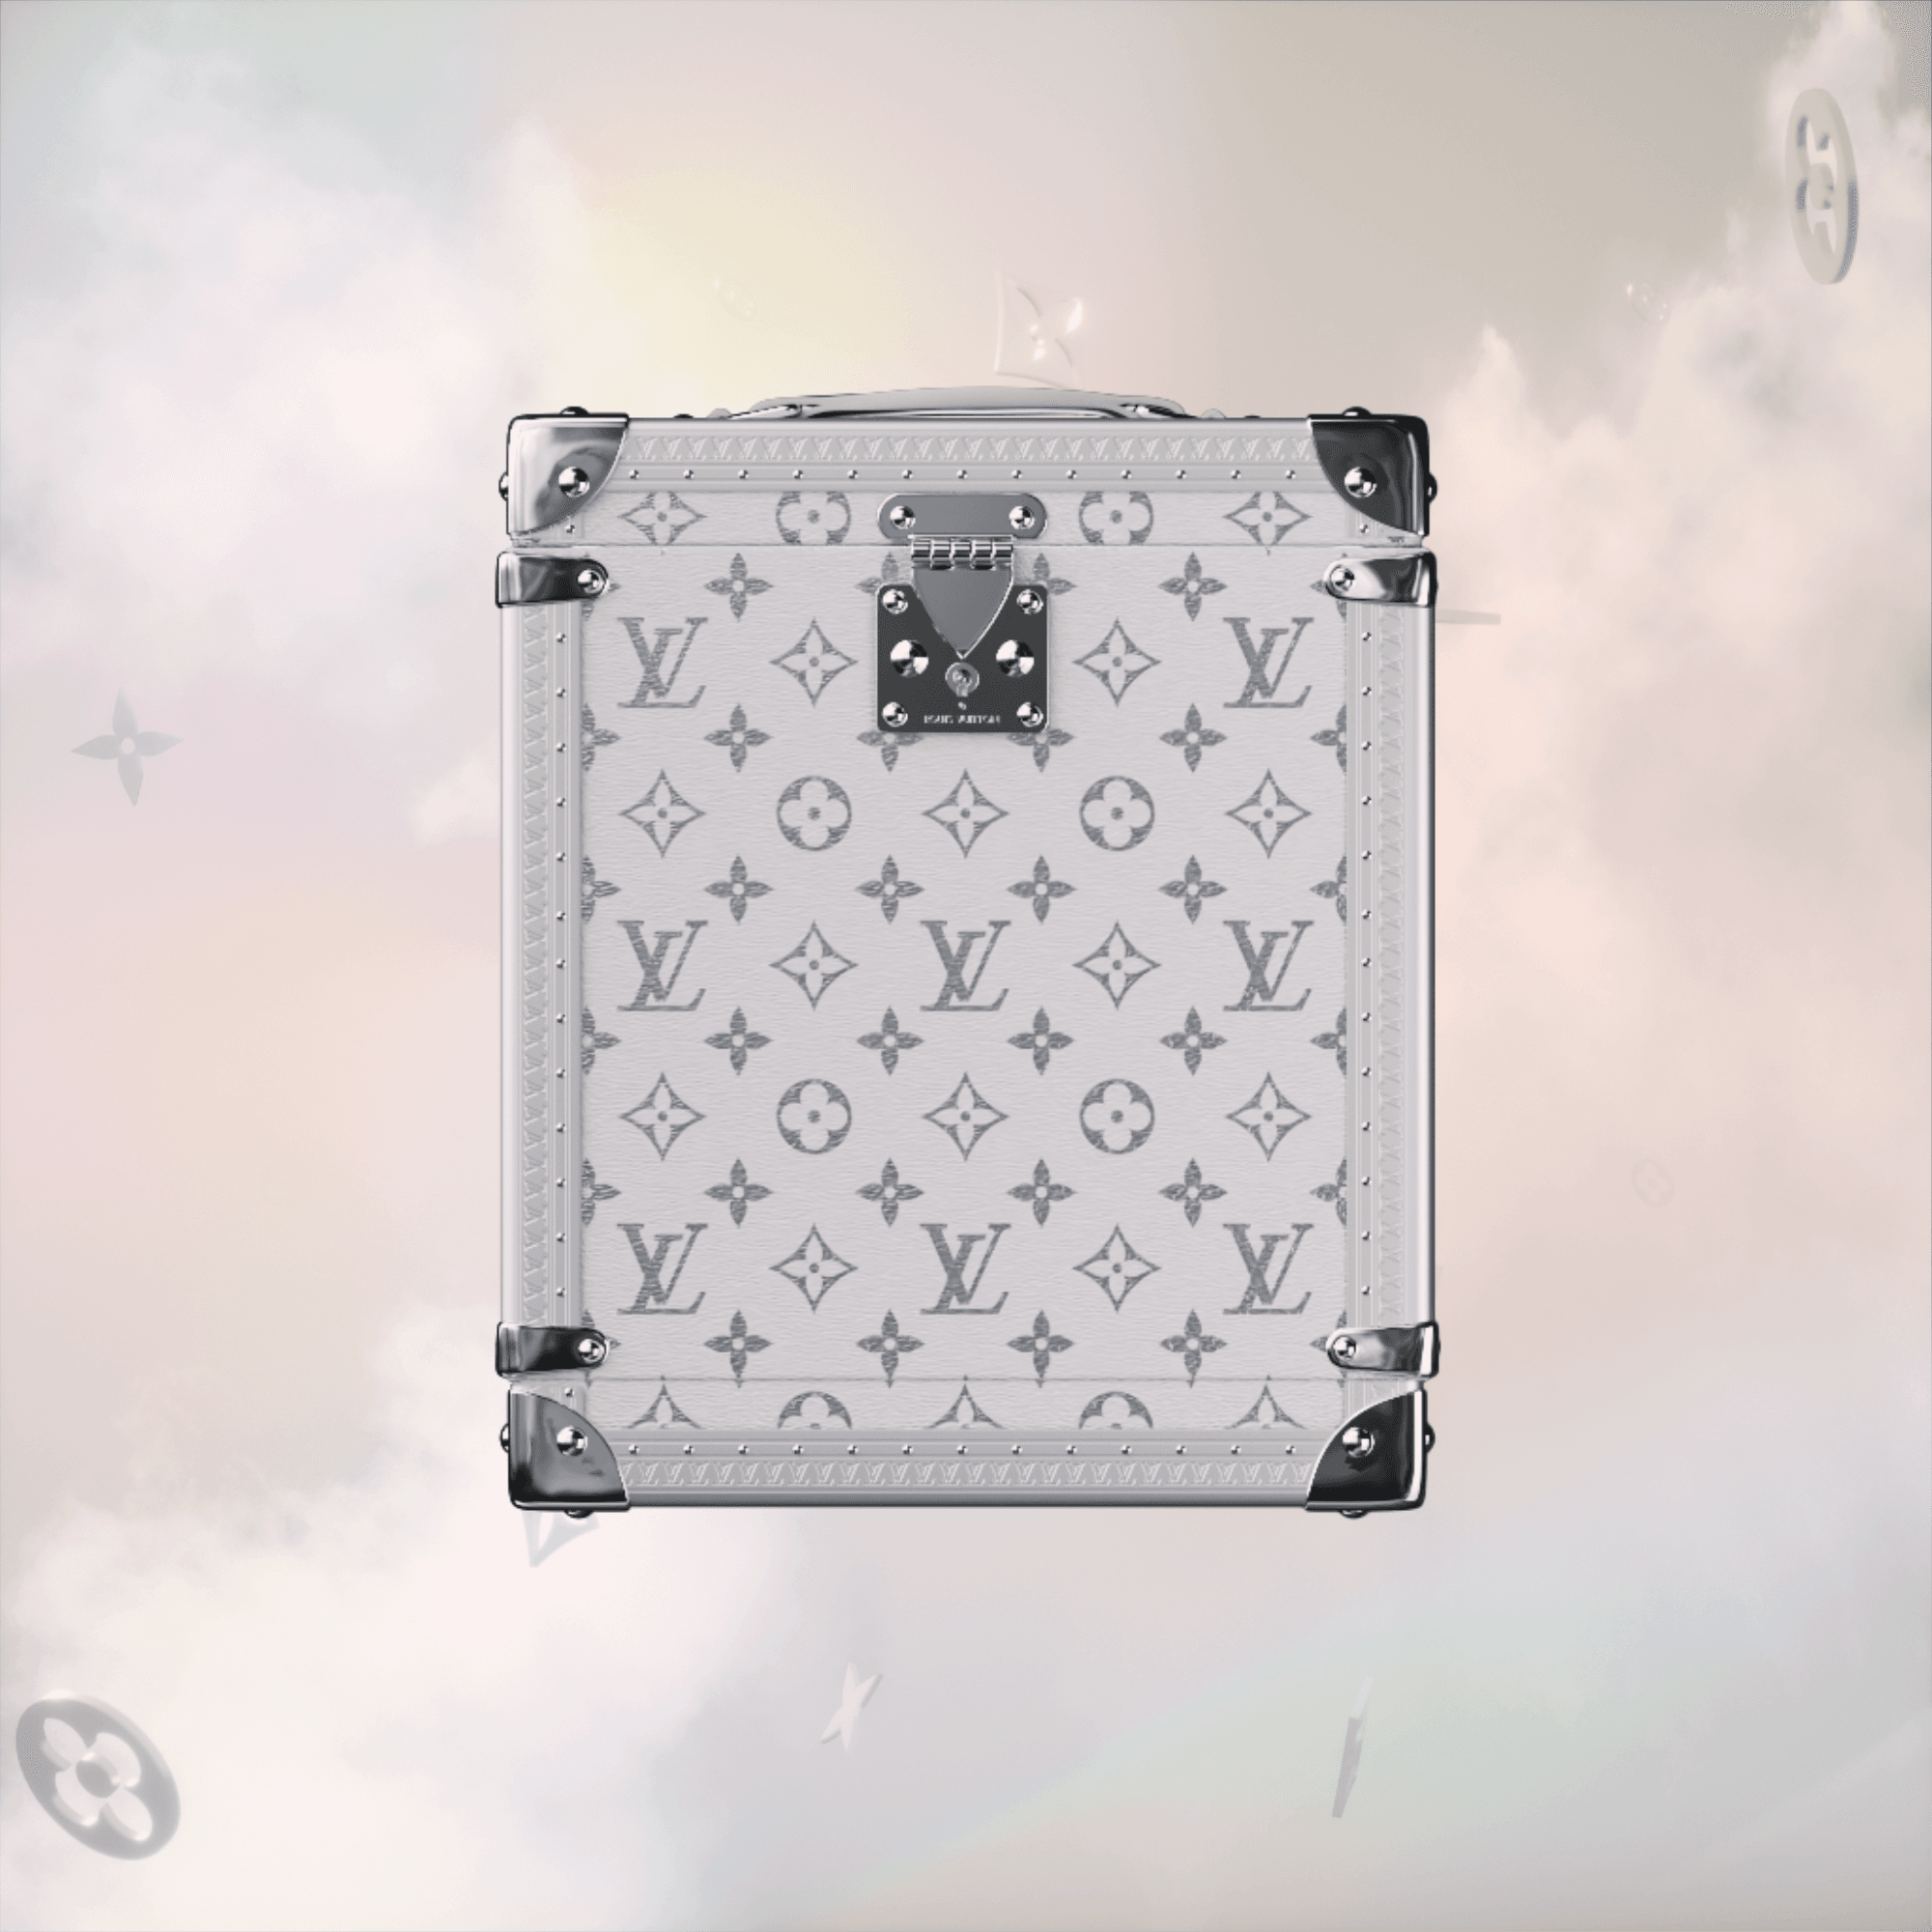 Louis Vuitton joins Web3 with digital trunk collection